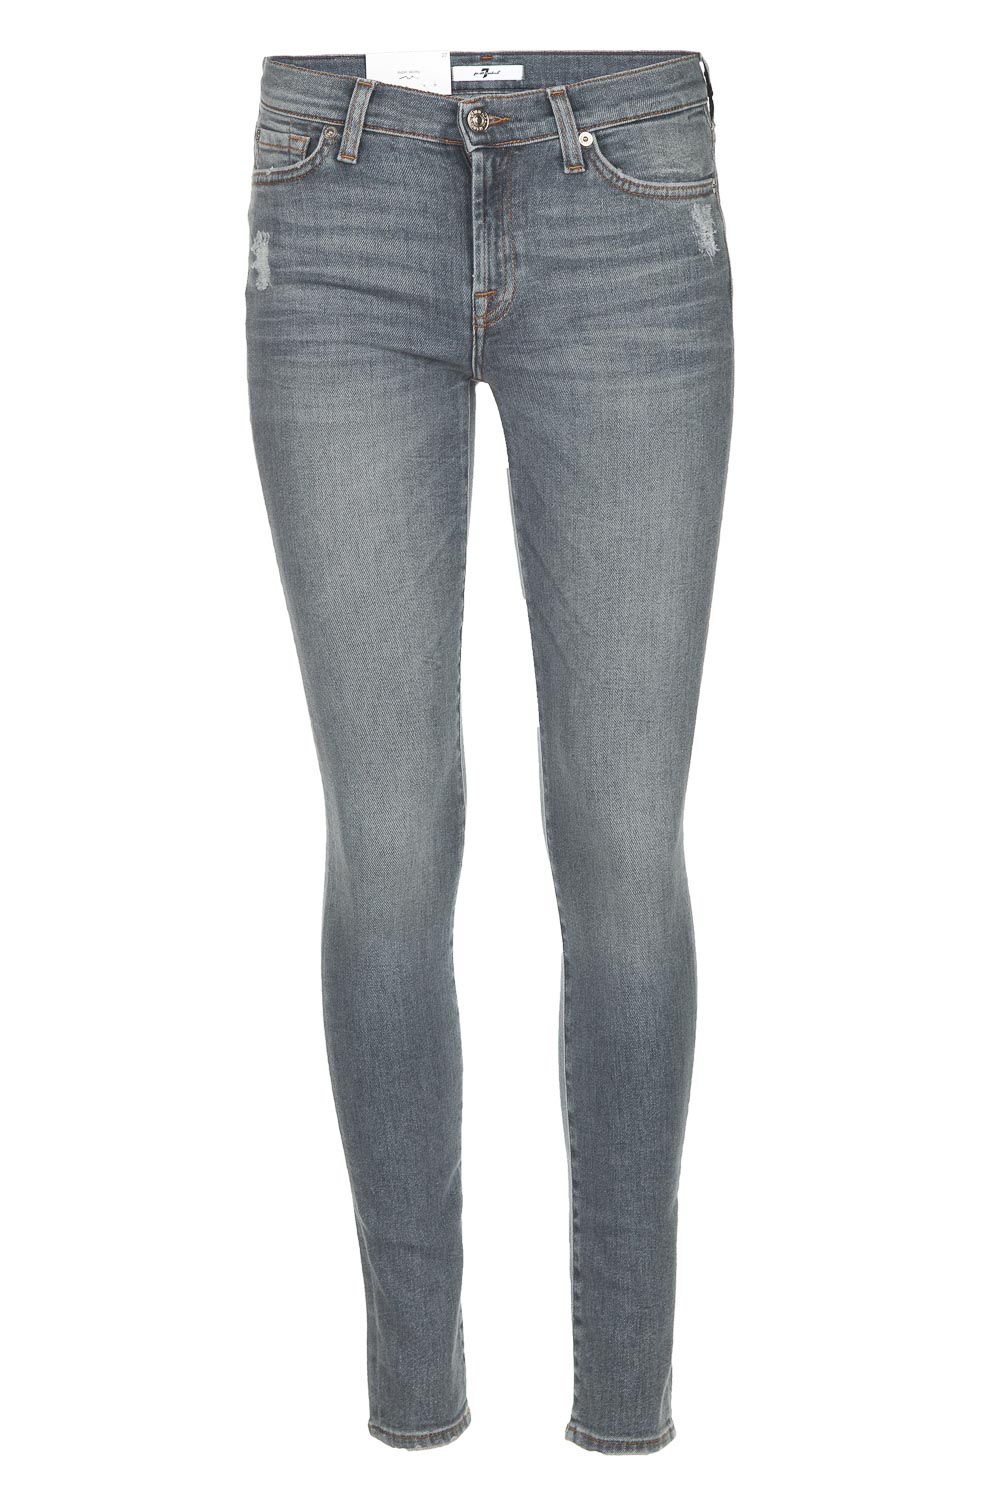 7 for all mankind grey skinny jeans